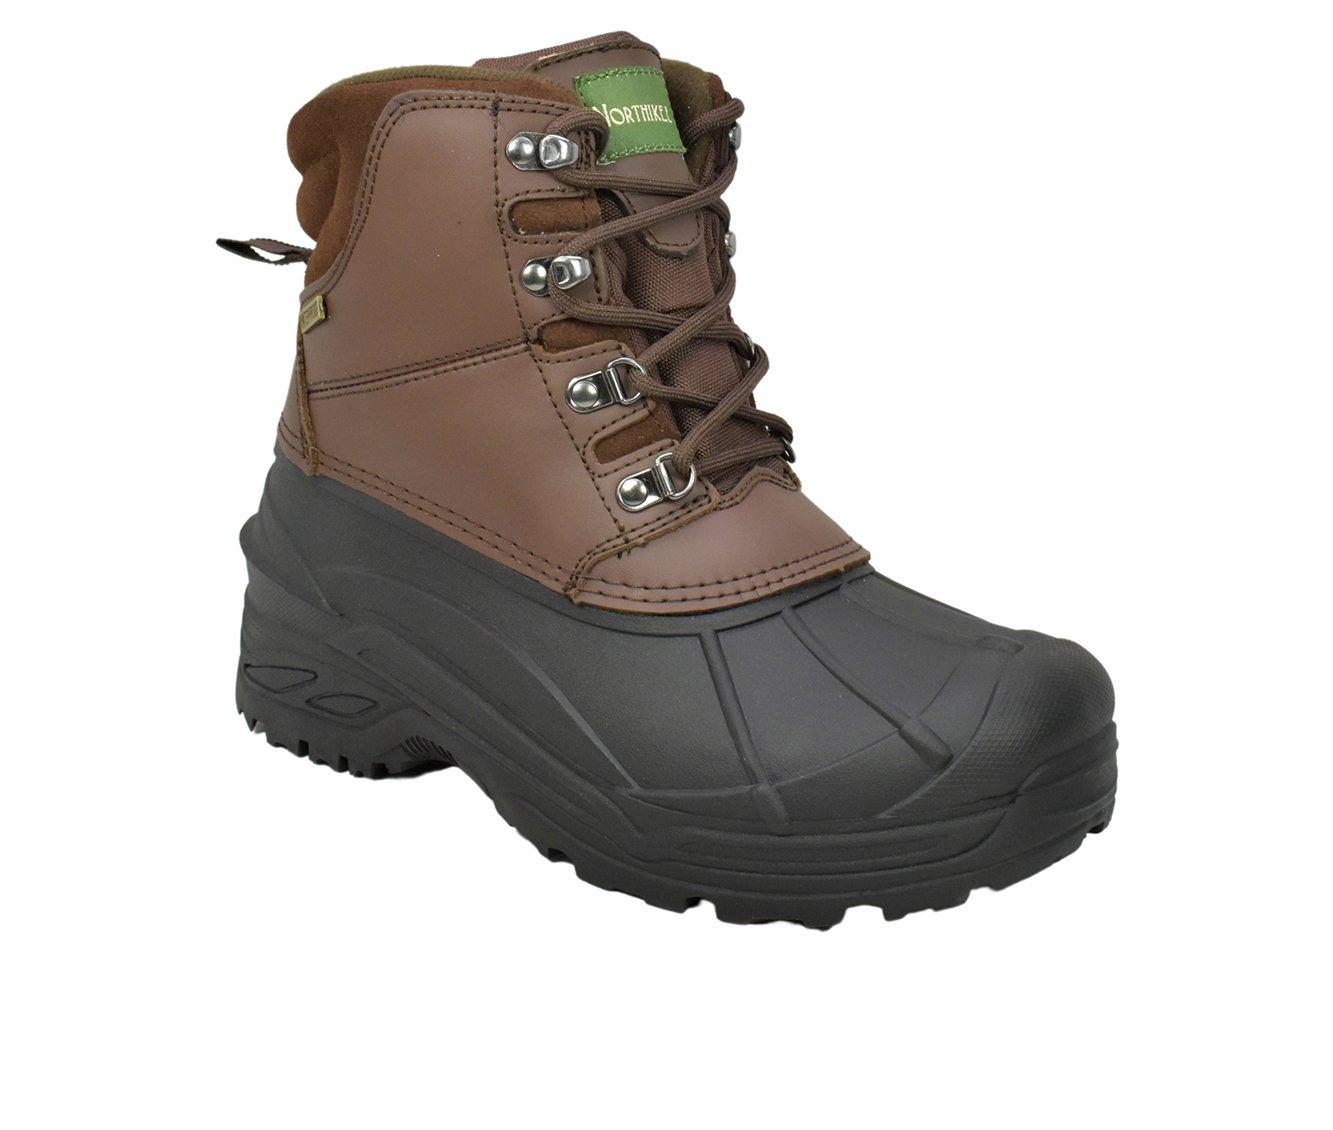 Best Sellers Men's Northikee Winter Boots cheap - for All the people